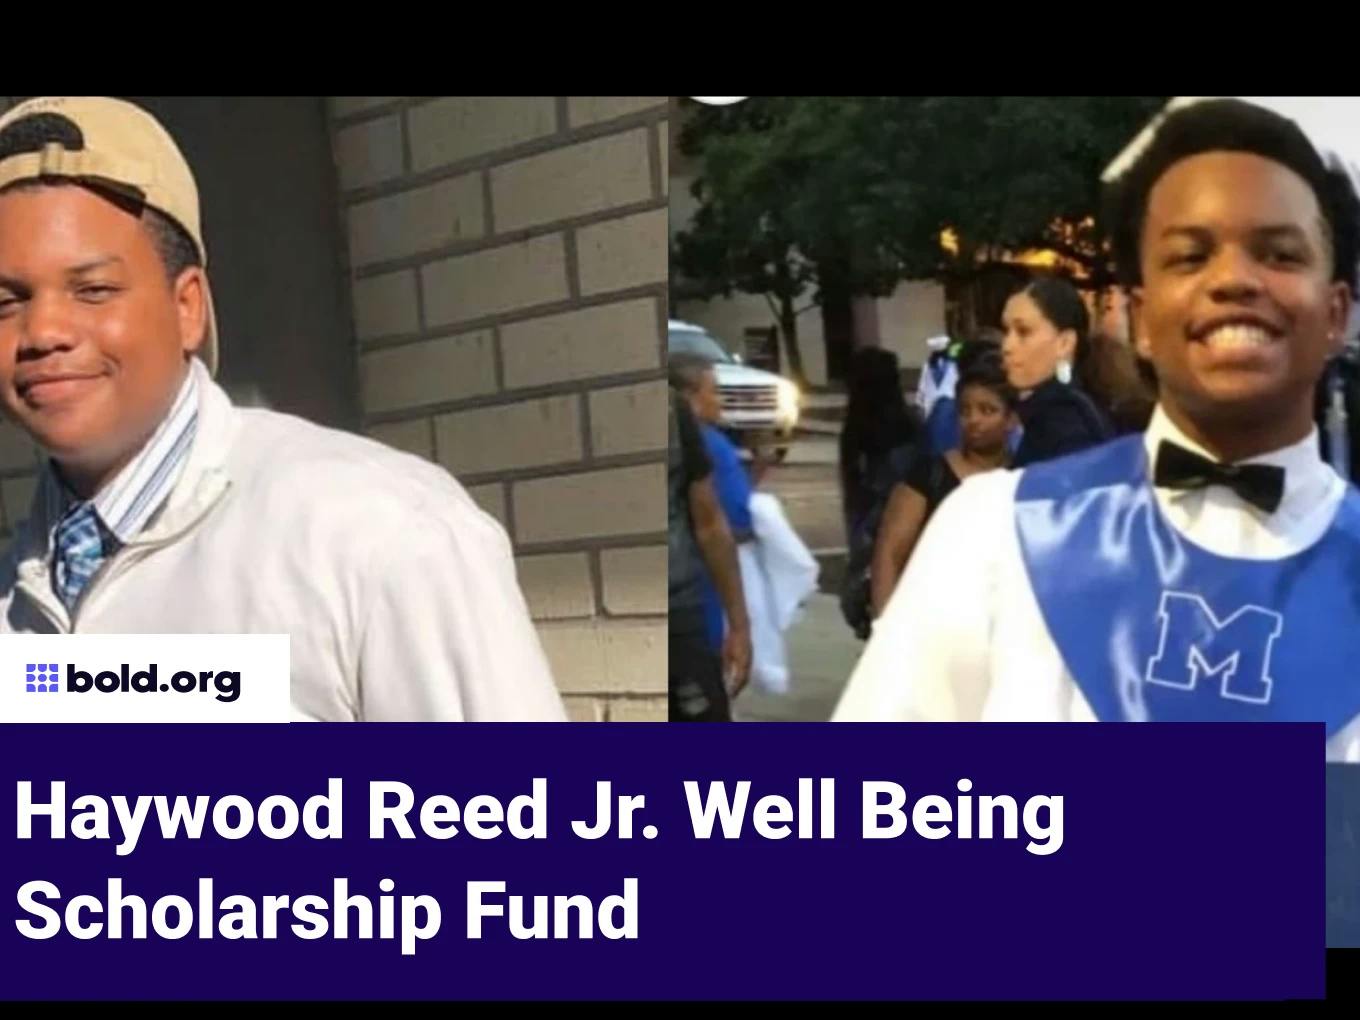 Haywood Reed Jr. Well Being Scholarship Fund